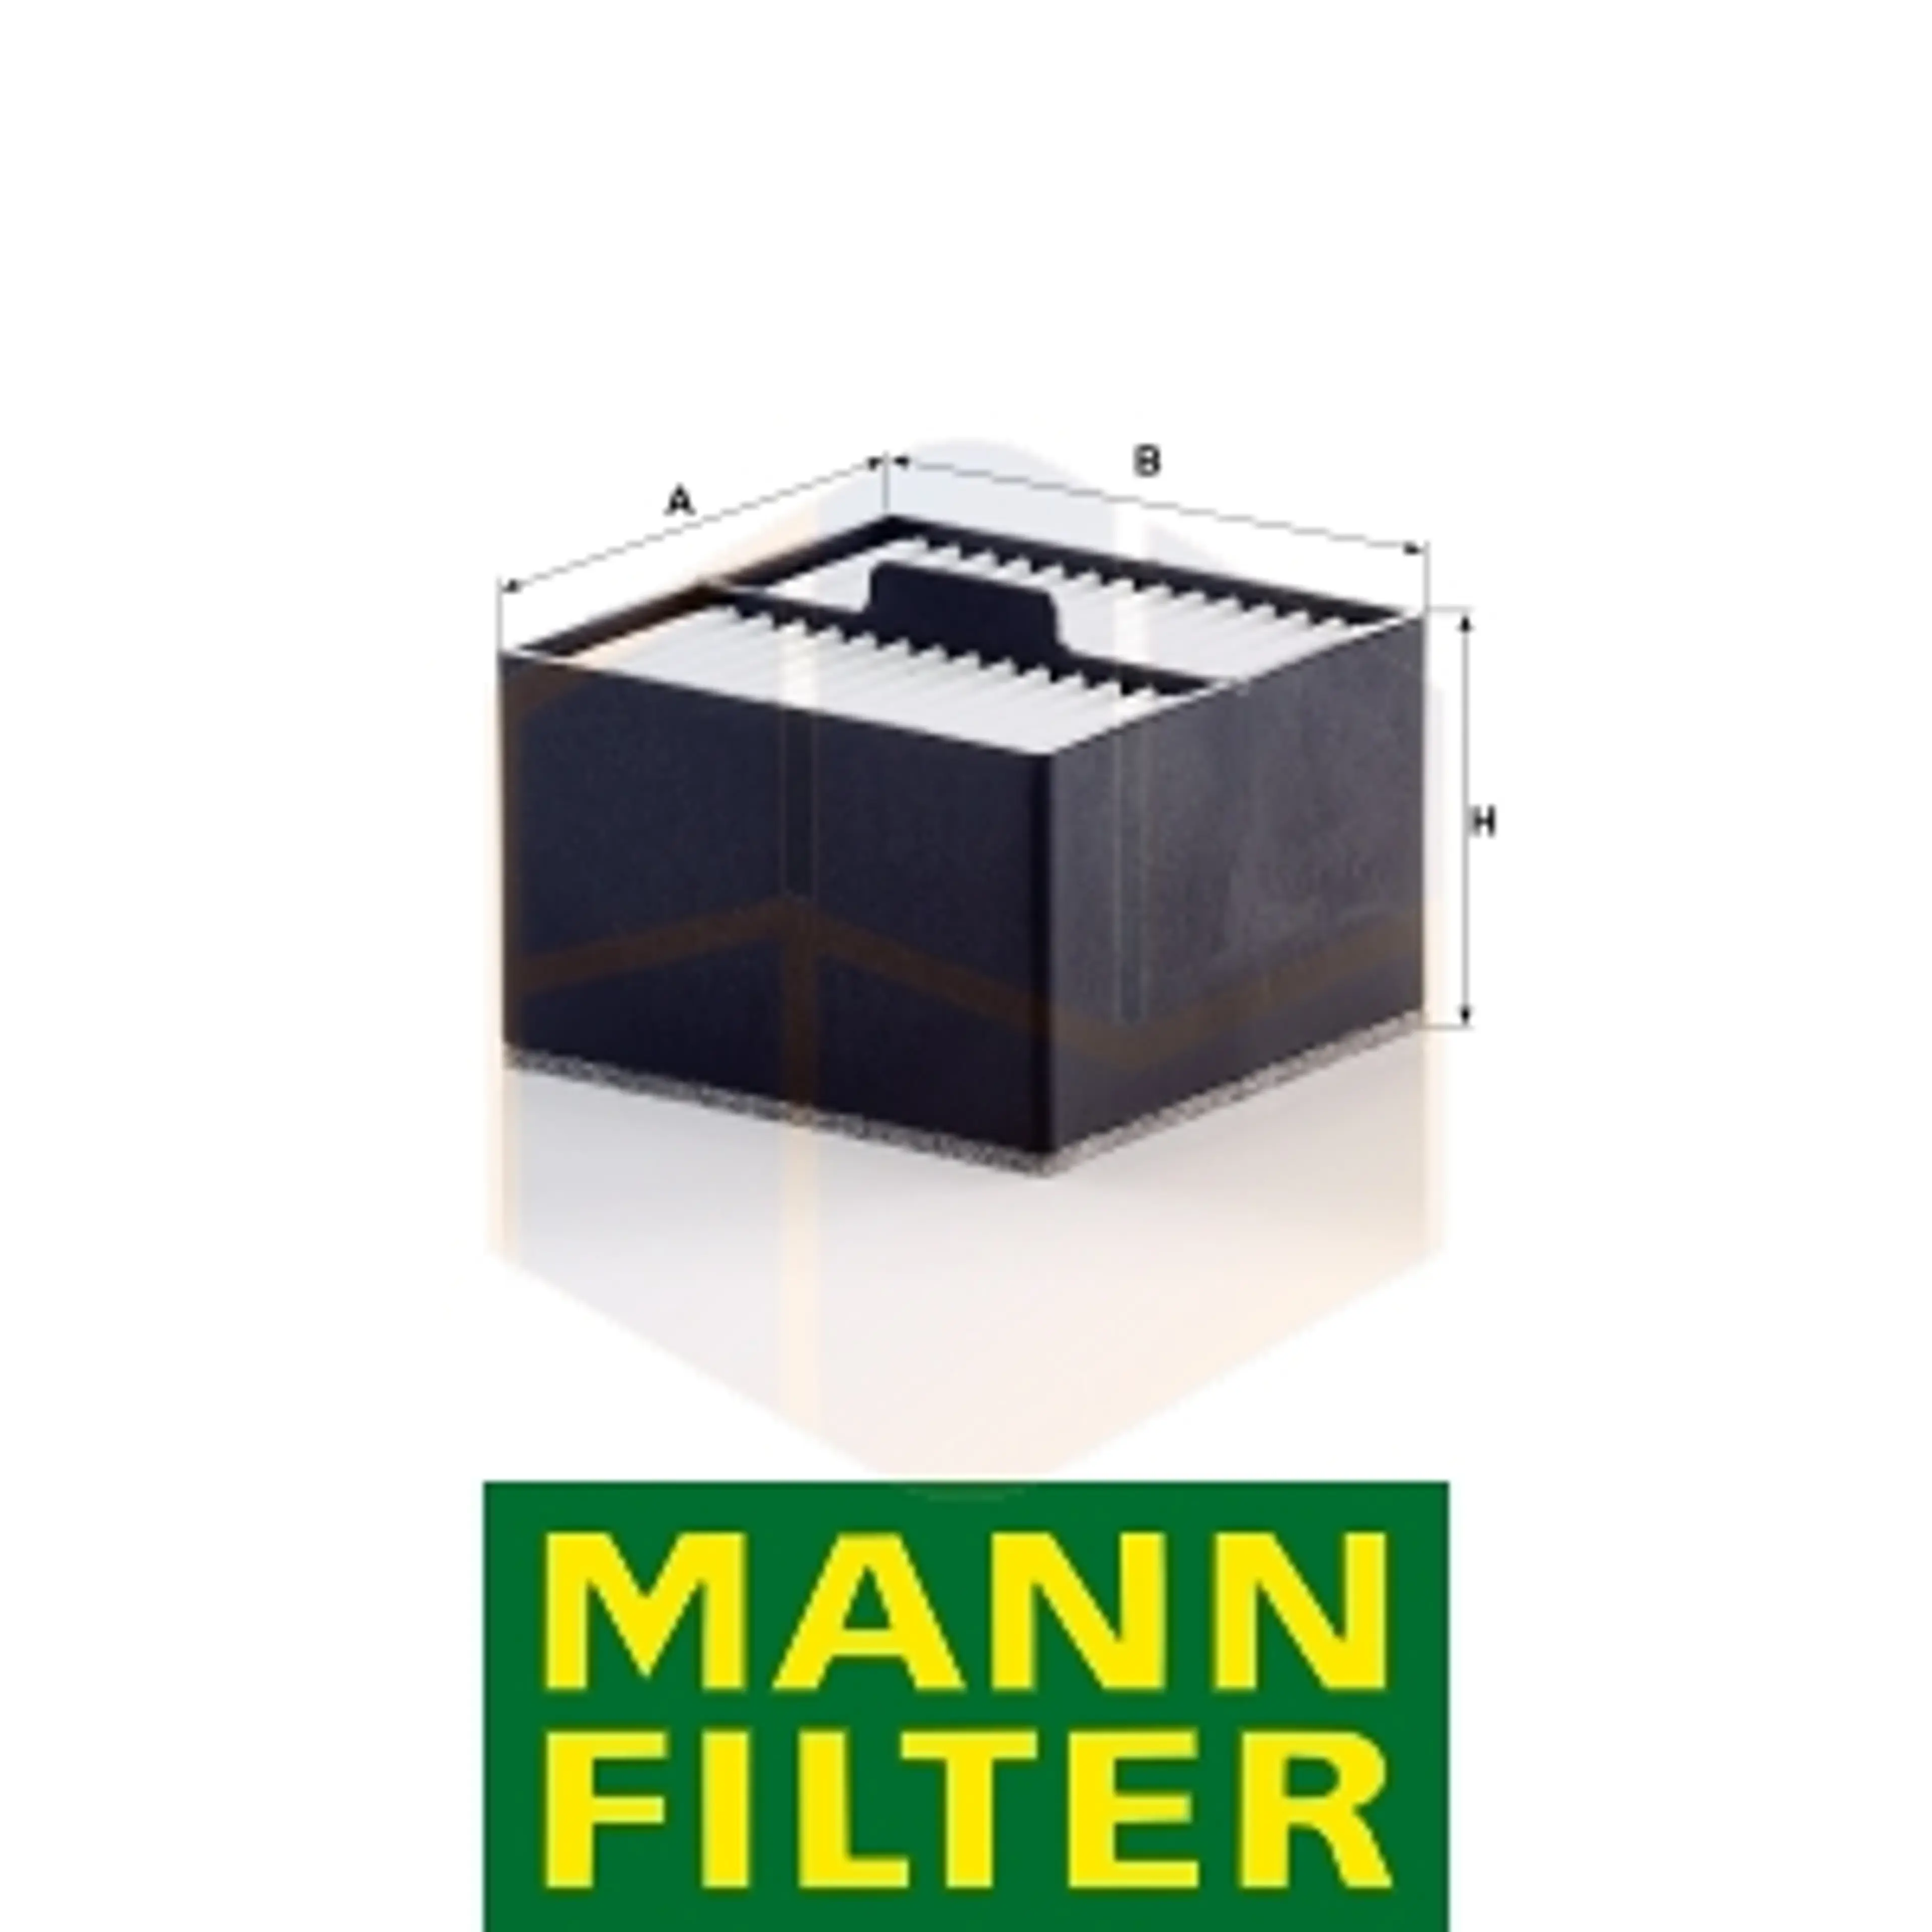 FILTRO COMBUSTIBLE PU 911 MANN